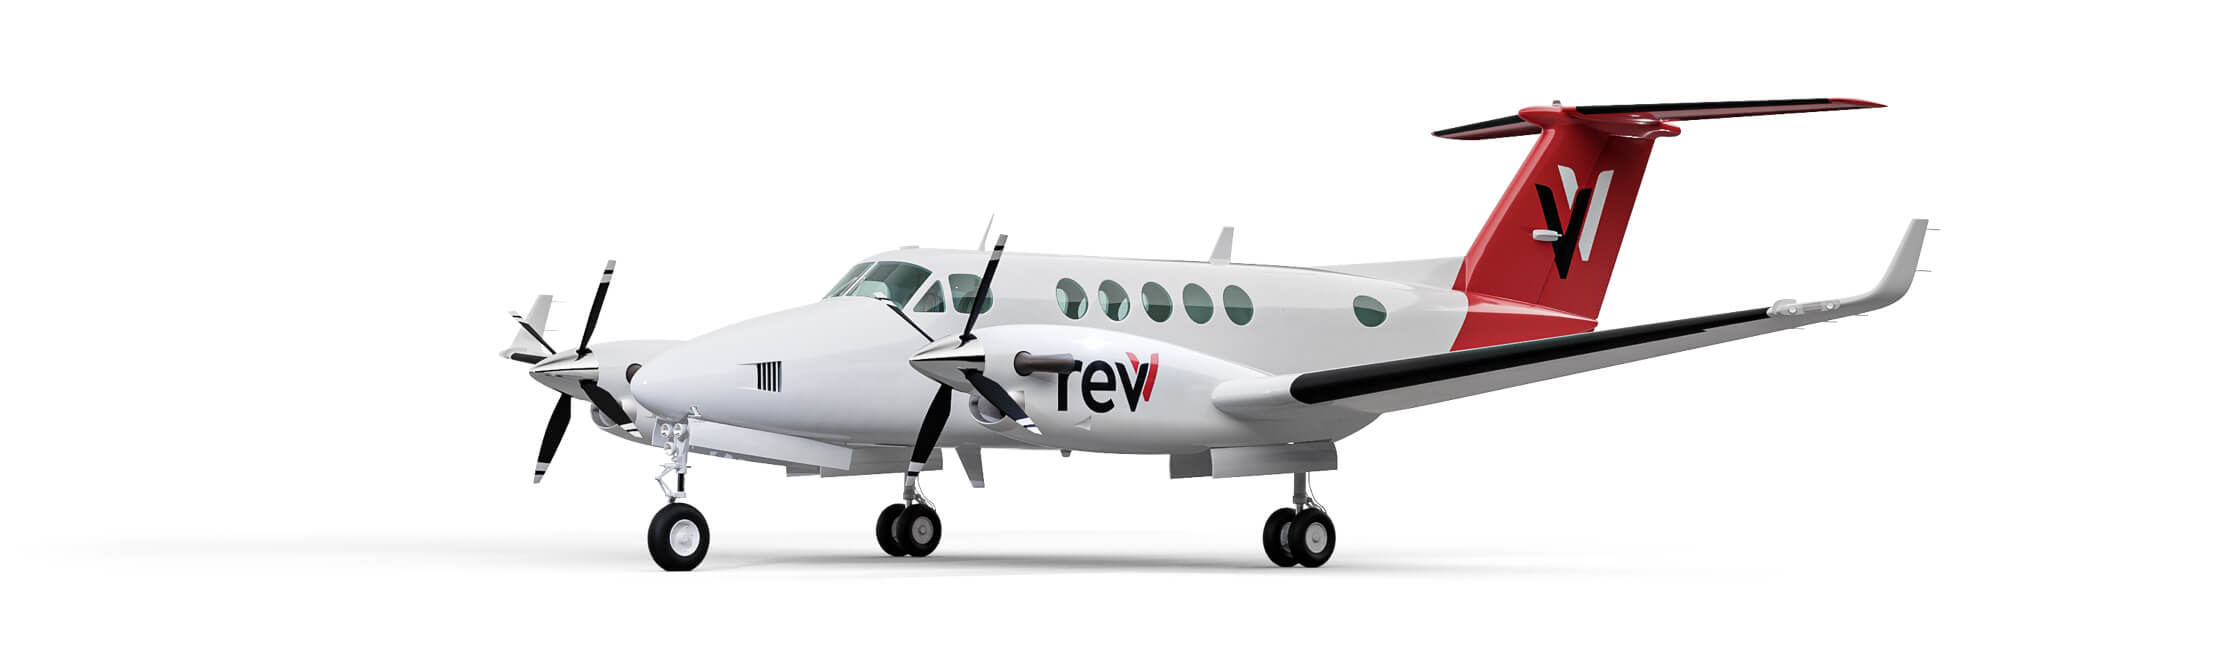 King Air 200 branded with the revv logo